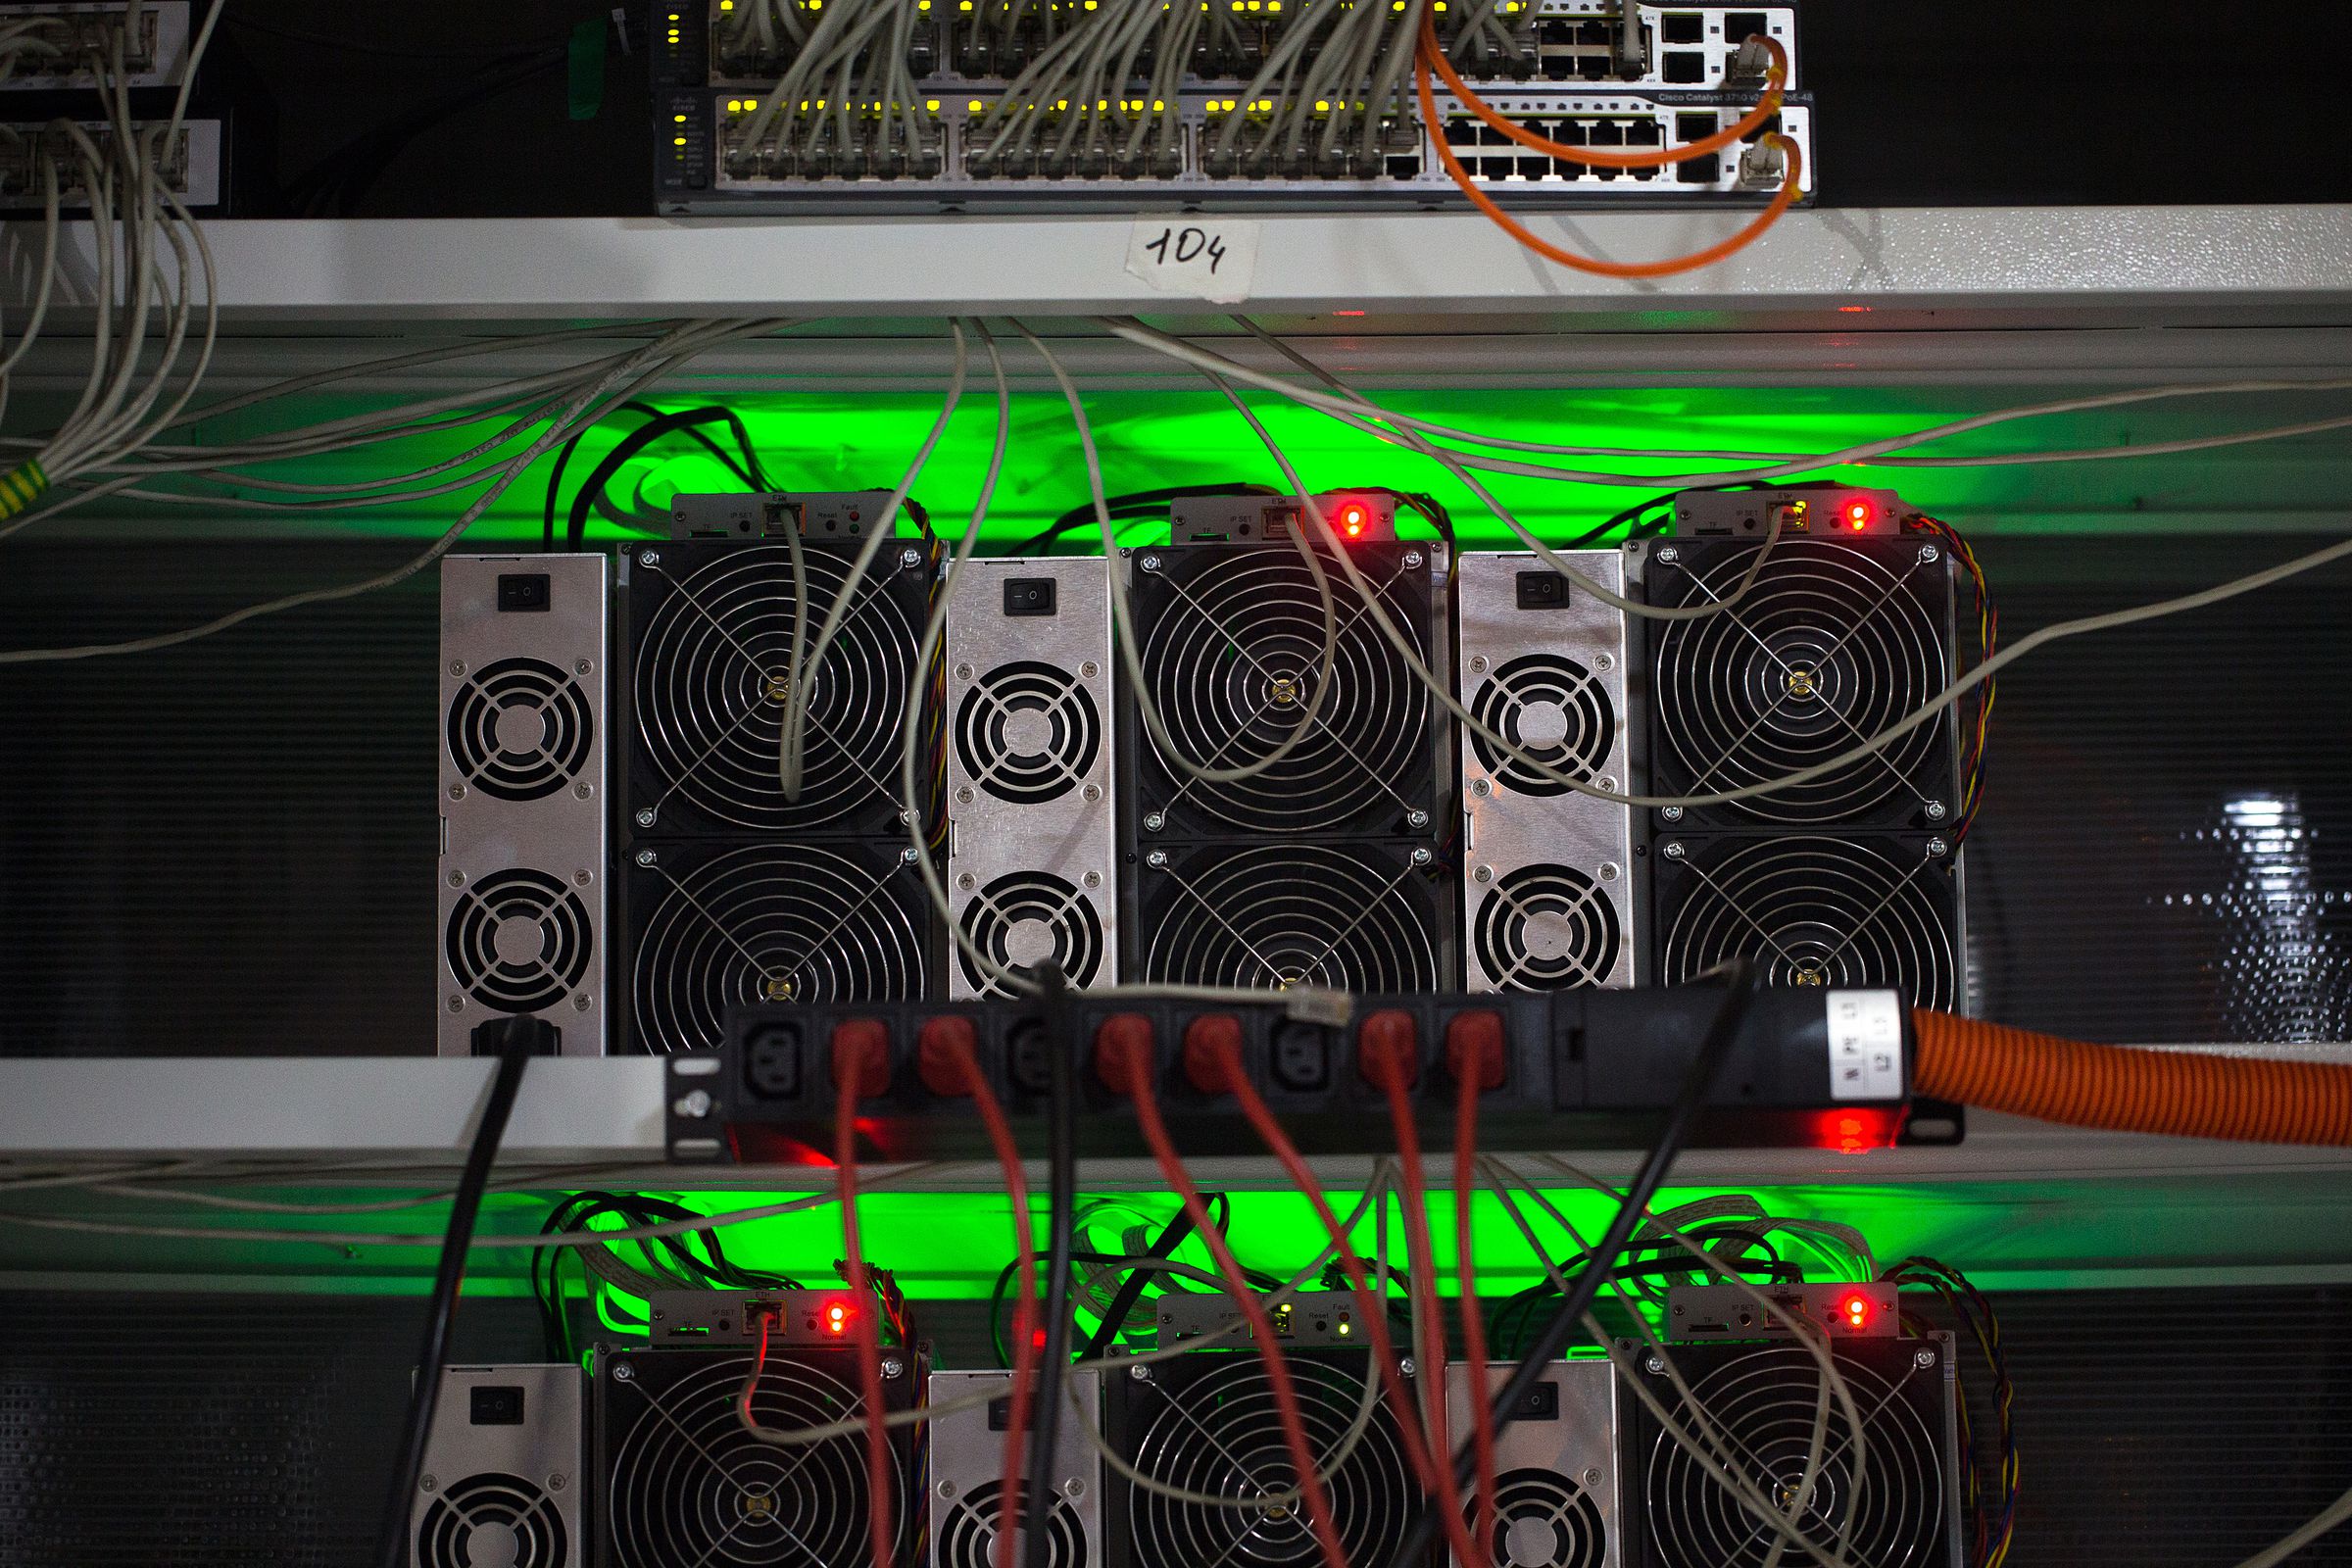 Wires stick out of specialized computers for Bitcoin mining glowing with green light